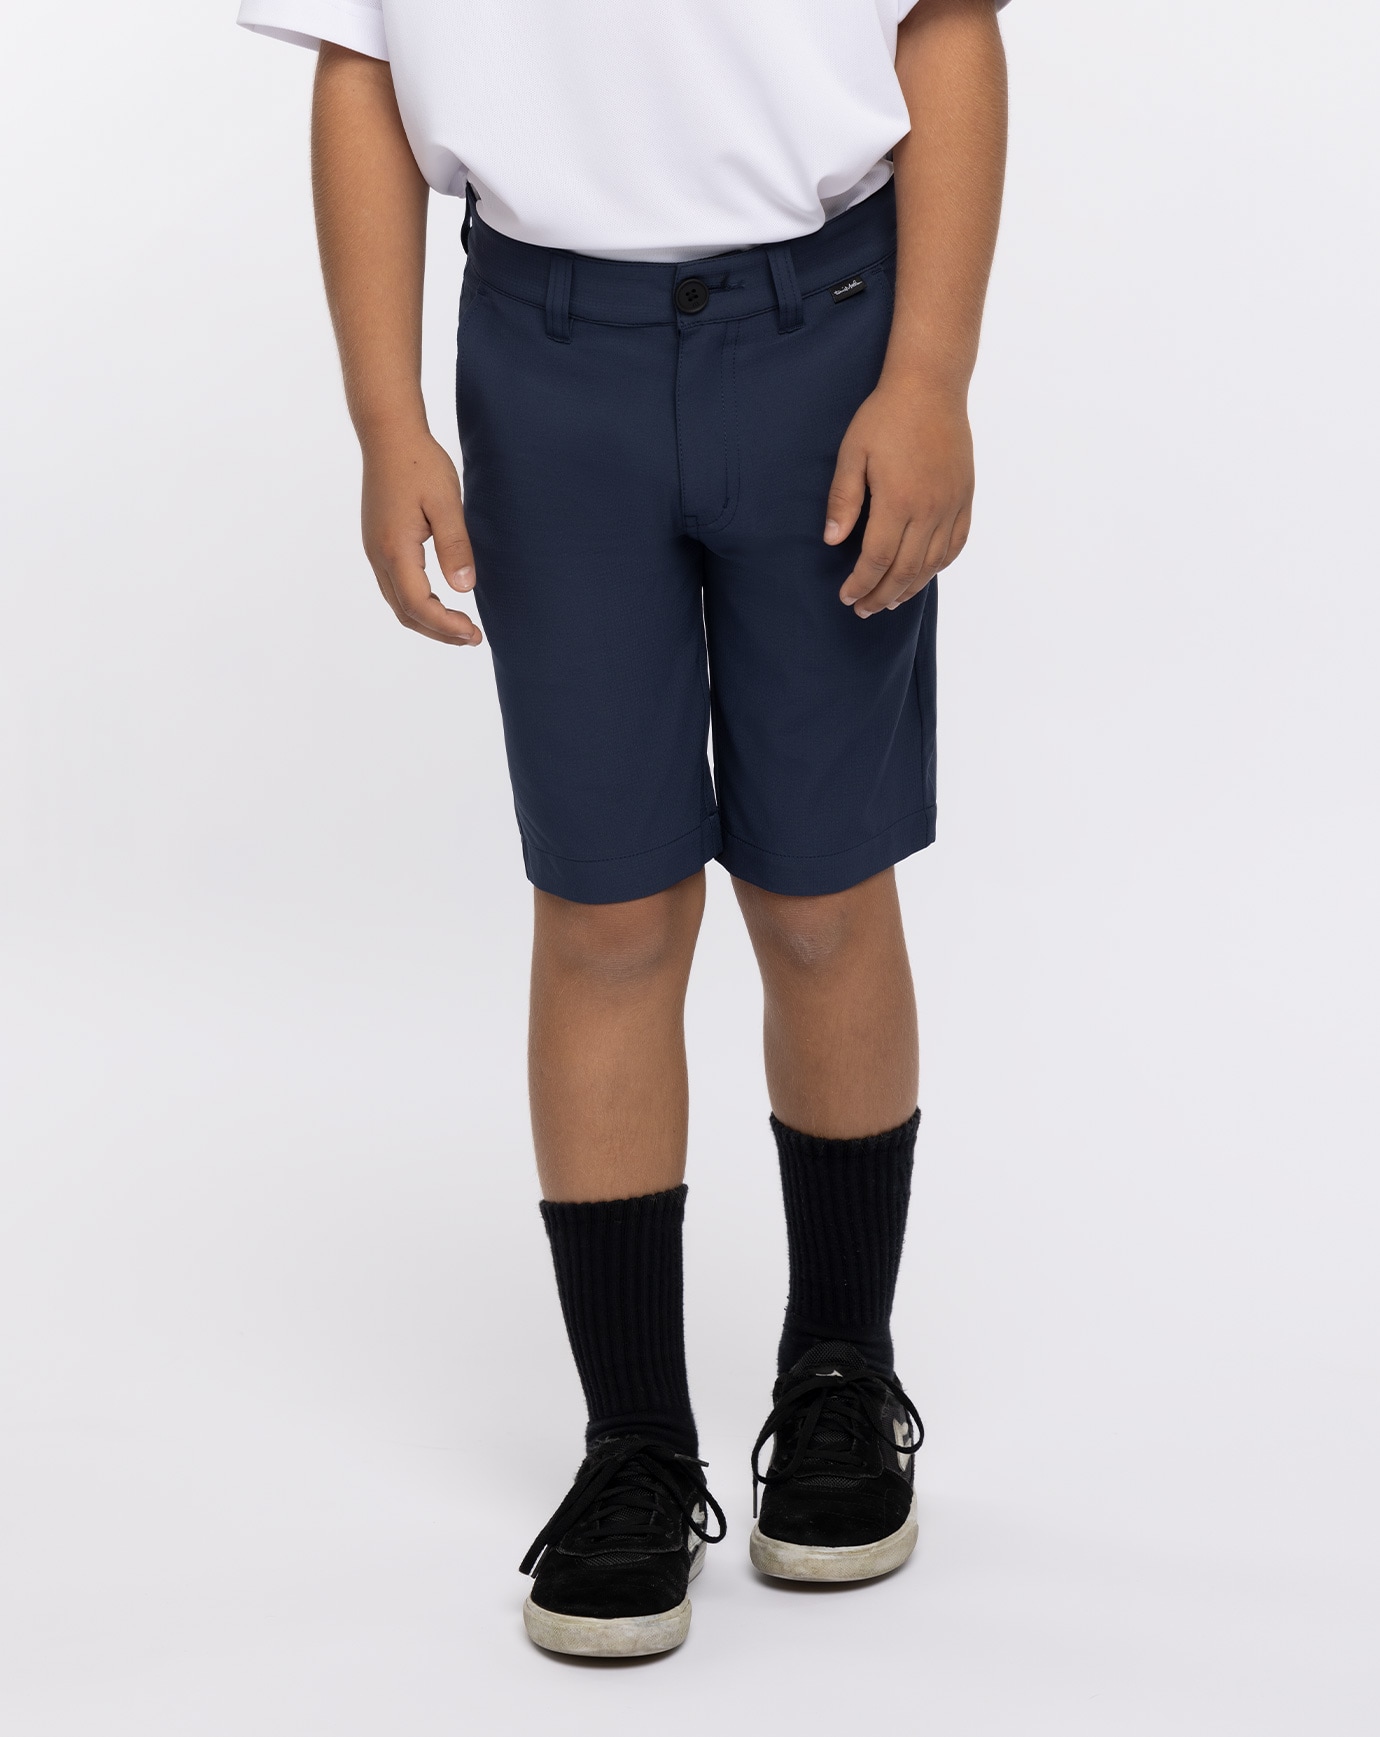 Related Product - STARNES YOUTH SHORT